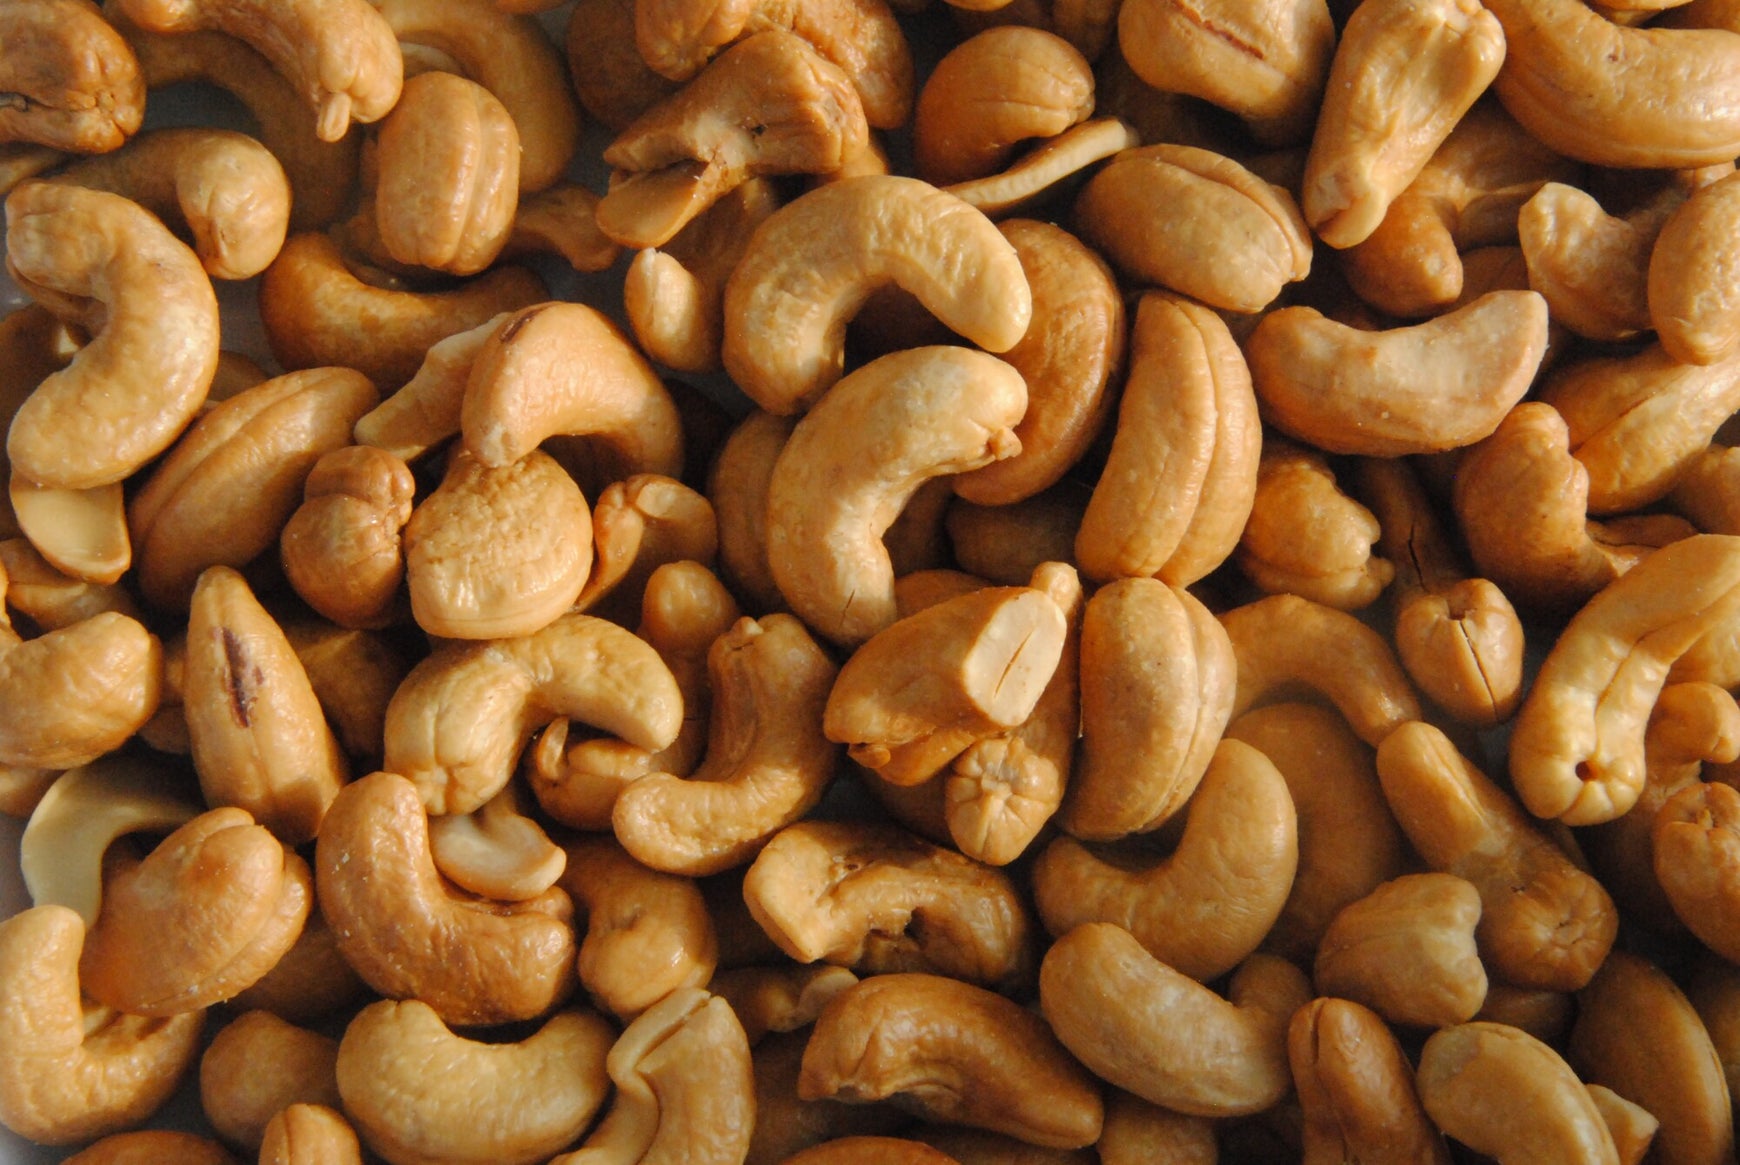 Cashew Nutritional Facts: The Top Vitamins Cashews Are Packed With